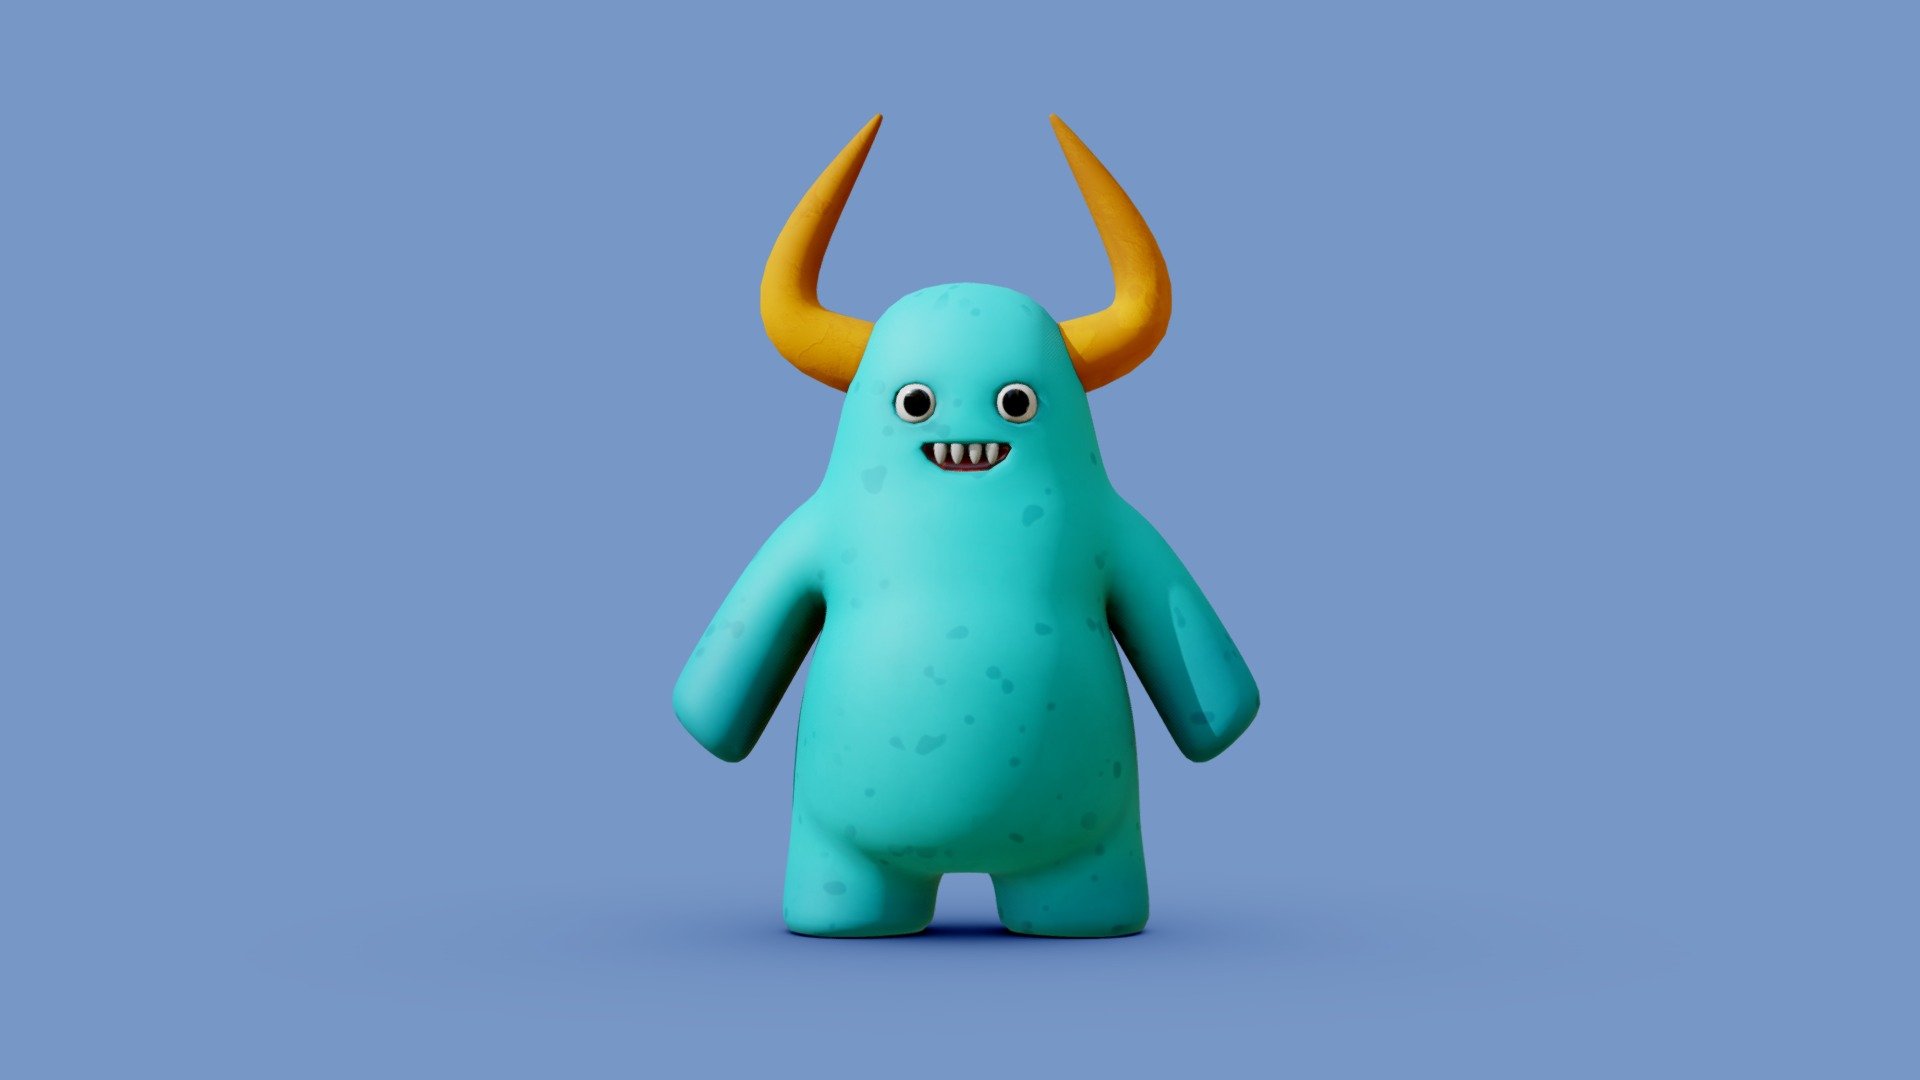 Cute Monster for your renders and games

Textures:

Diffuse color, Roughness, Normal, AO

All textures are 2K

Files Formats:

Blend

Fbx

Obj - Cute Monster - Buy Royalty Free 3D model by Vanessa Araújo (@vanessa3d) 3d model